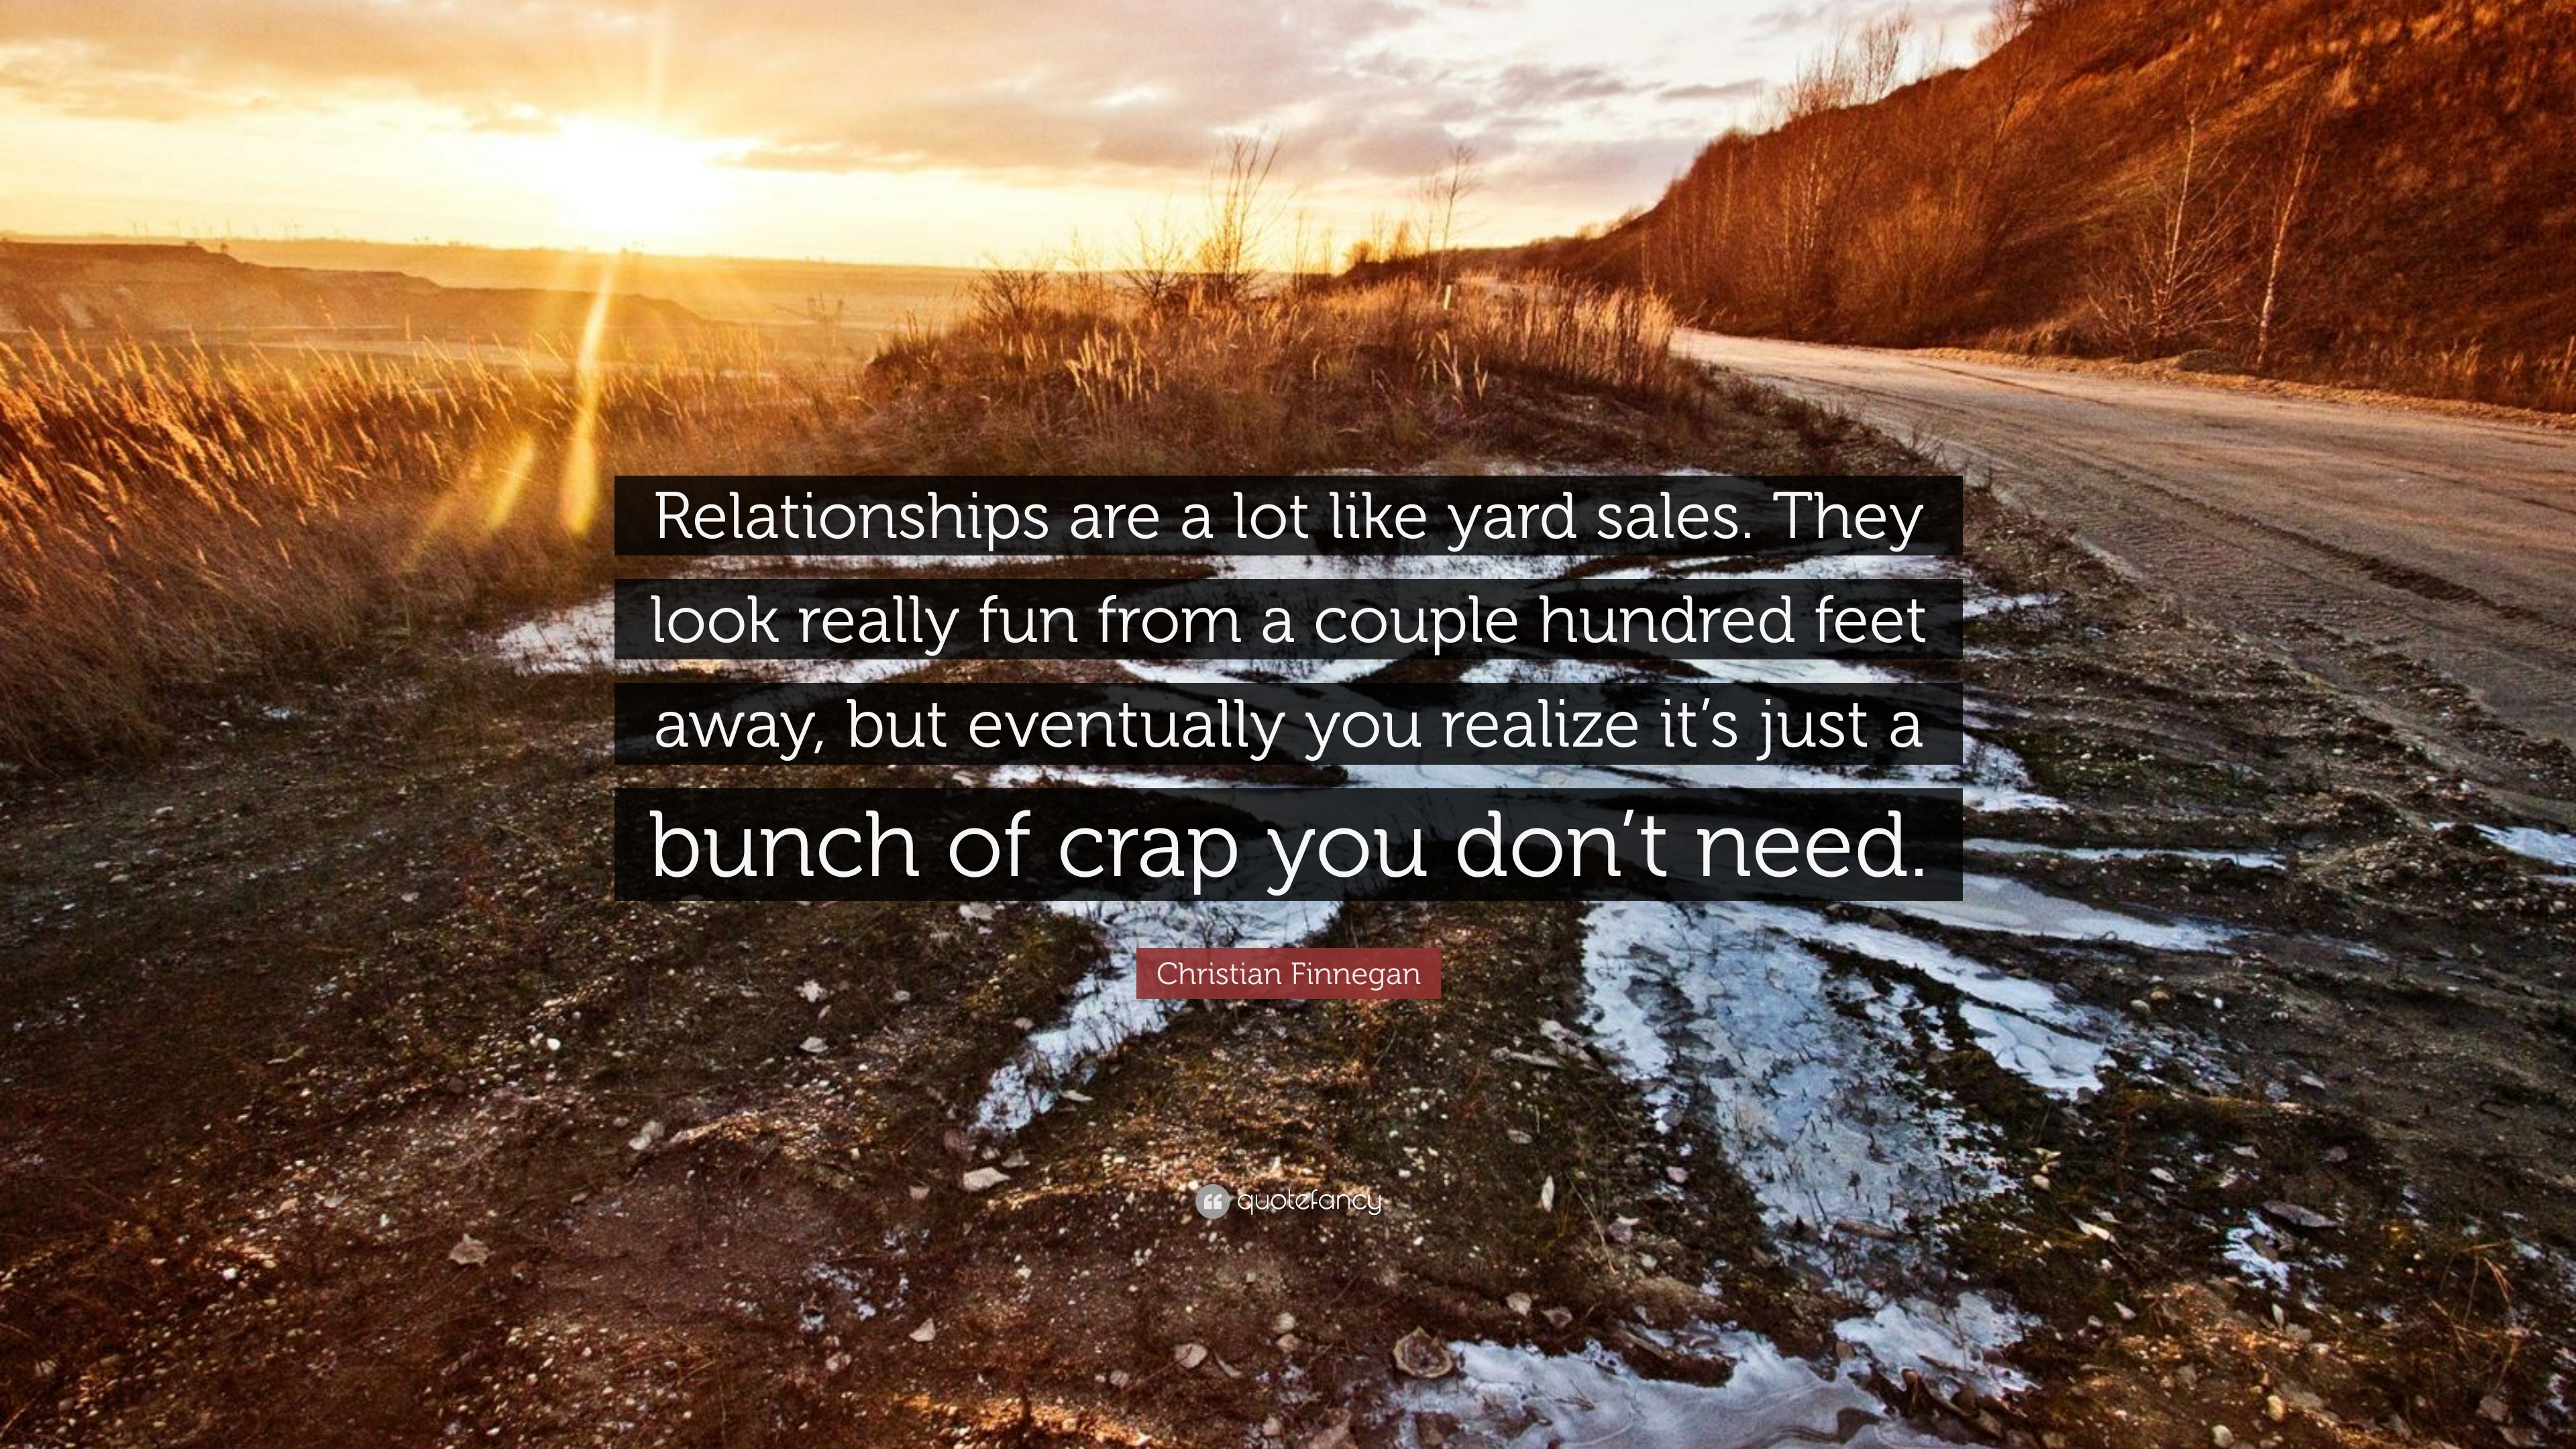 Christian Finnegan Quote “Relationships are a lot like yard sales They look really